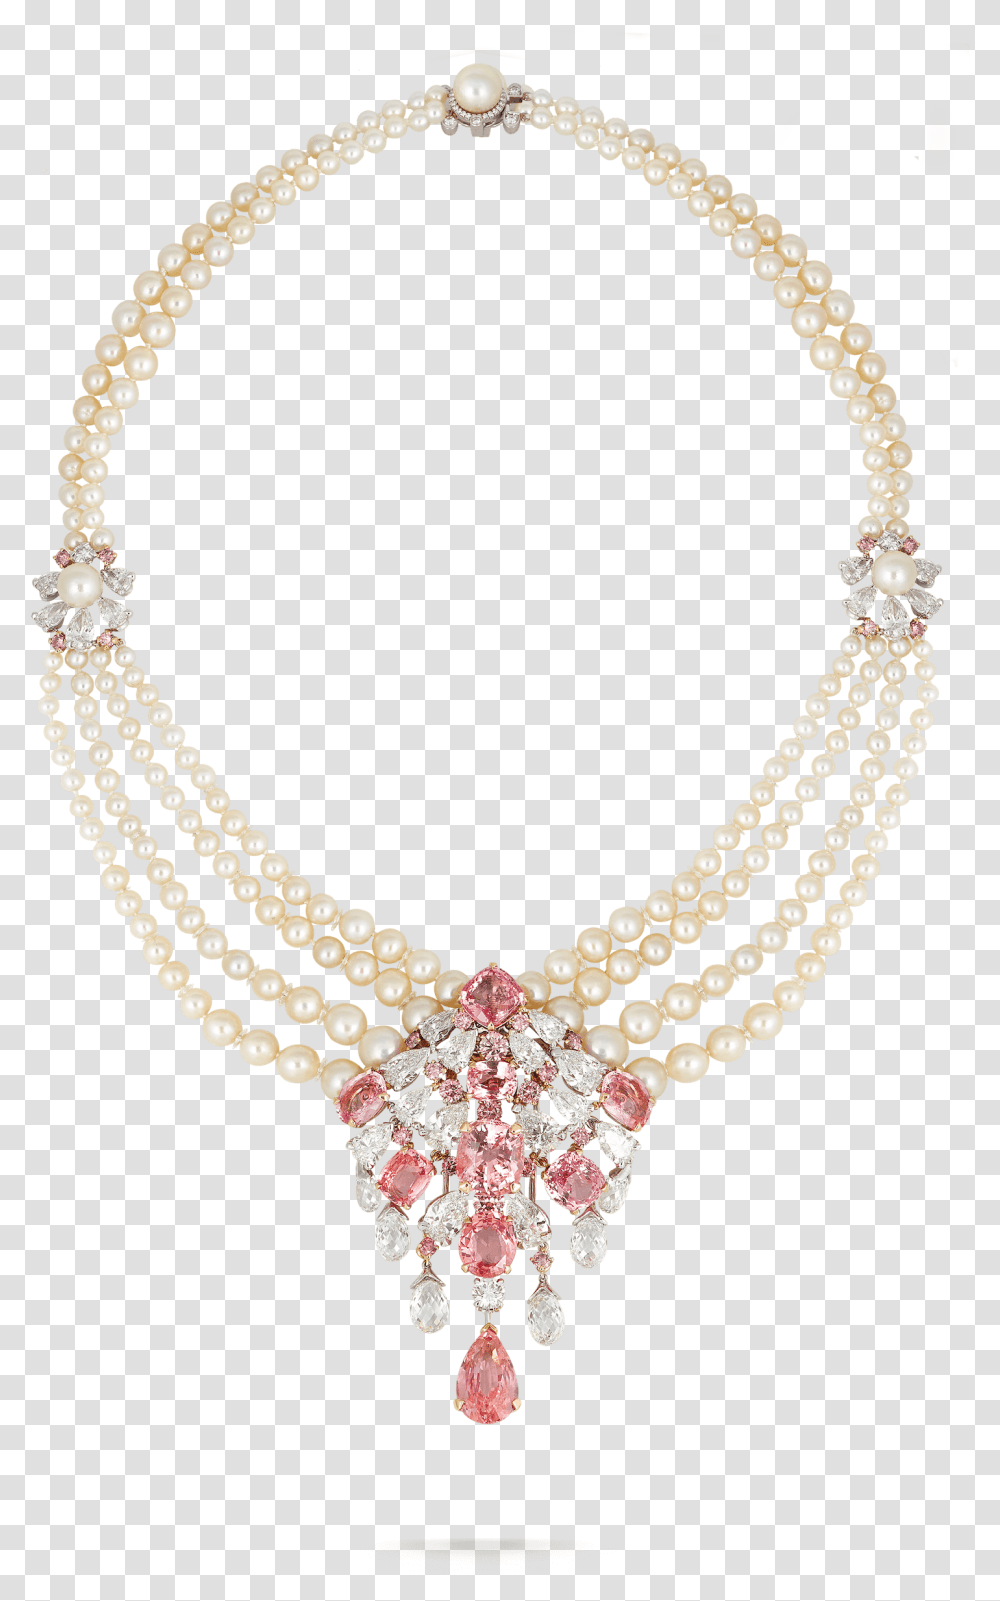 Padparadscha Sapphire And Pearl Necklace Padparadscha Sapphire High Jewelry, Accessories, Accessory, Diamond, Gemstone Transparent Png